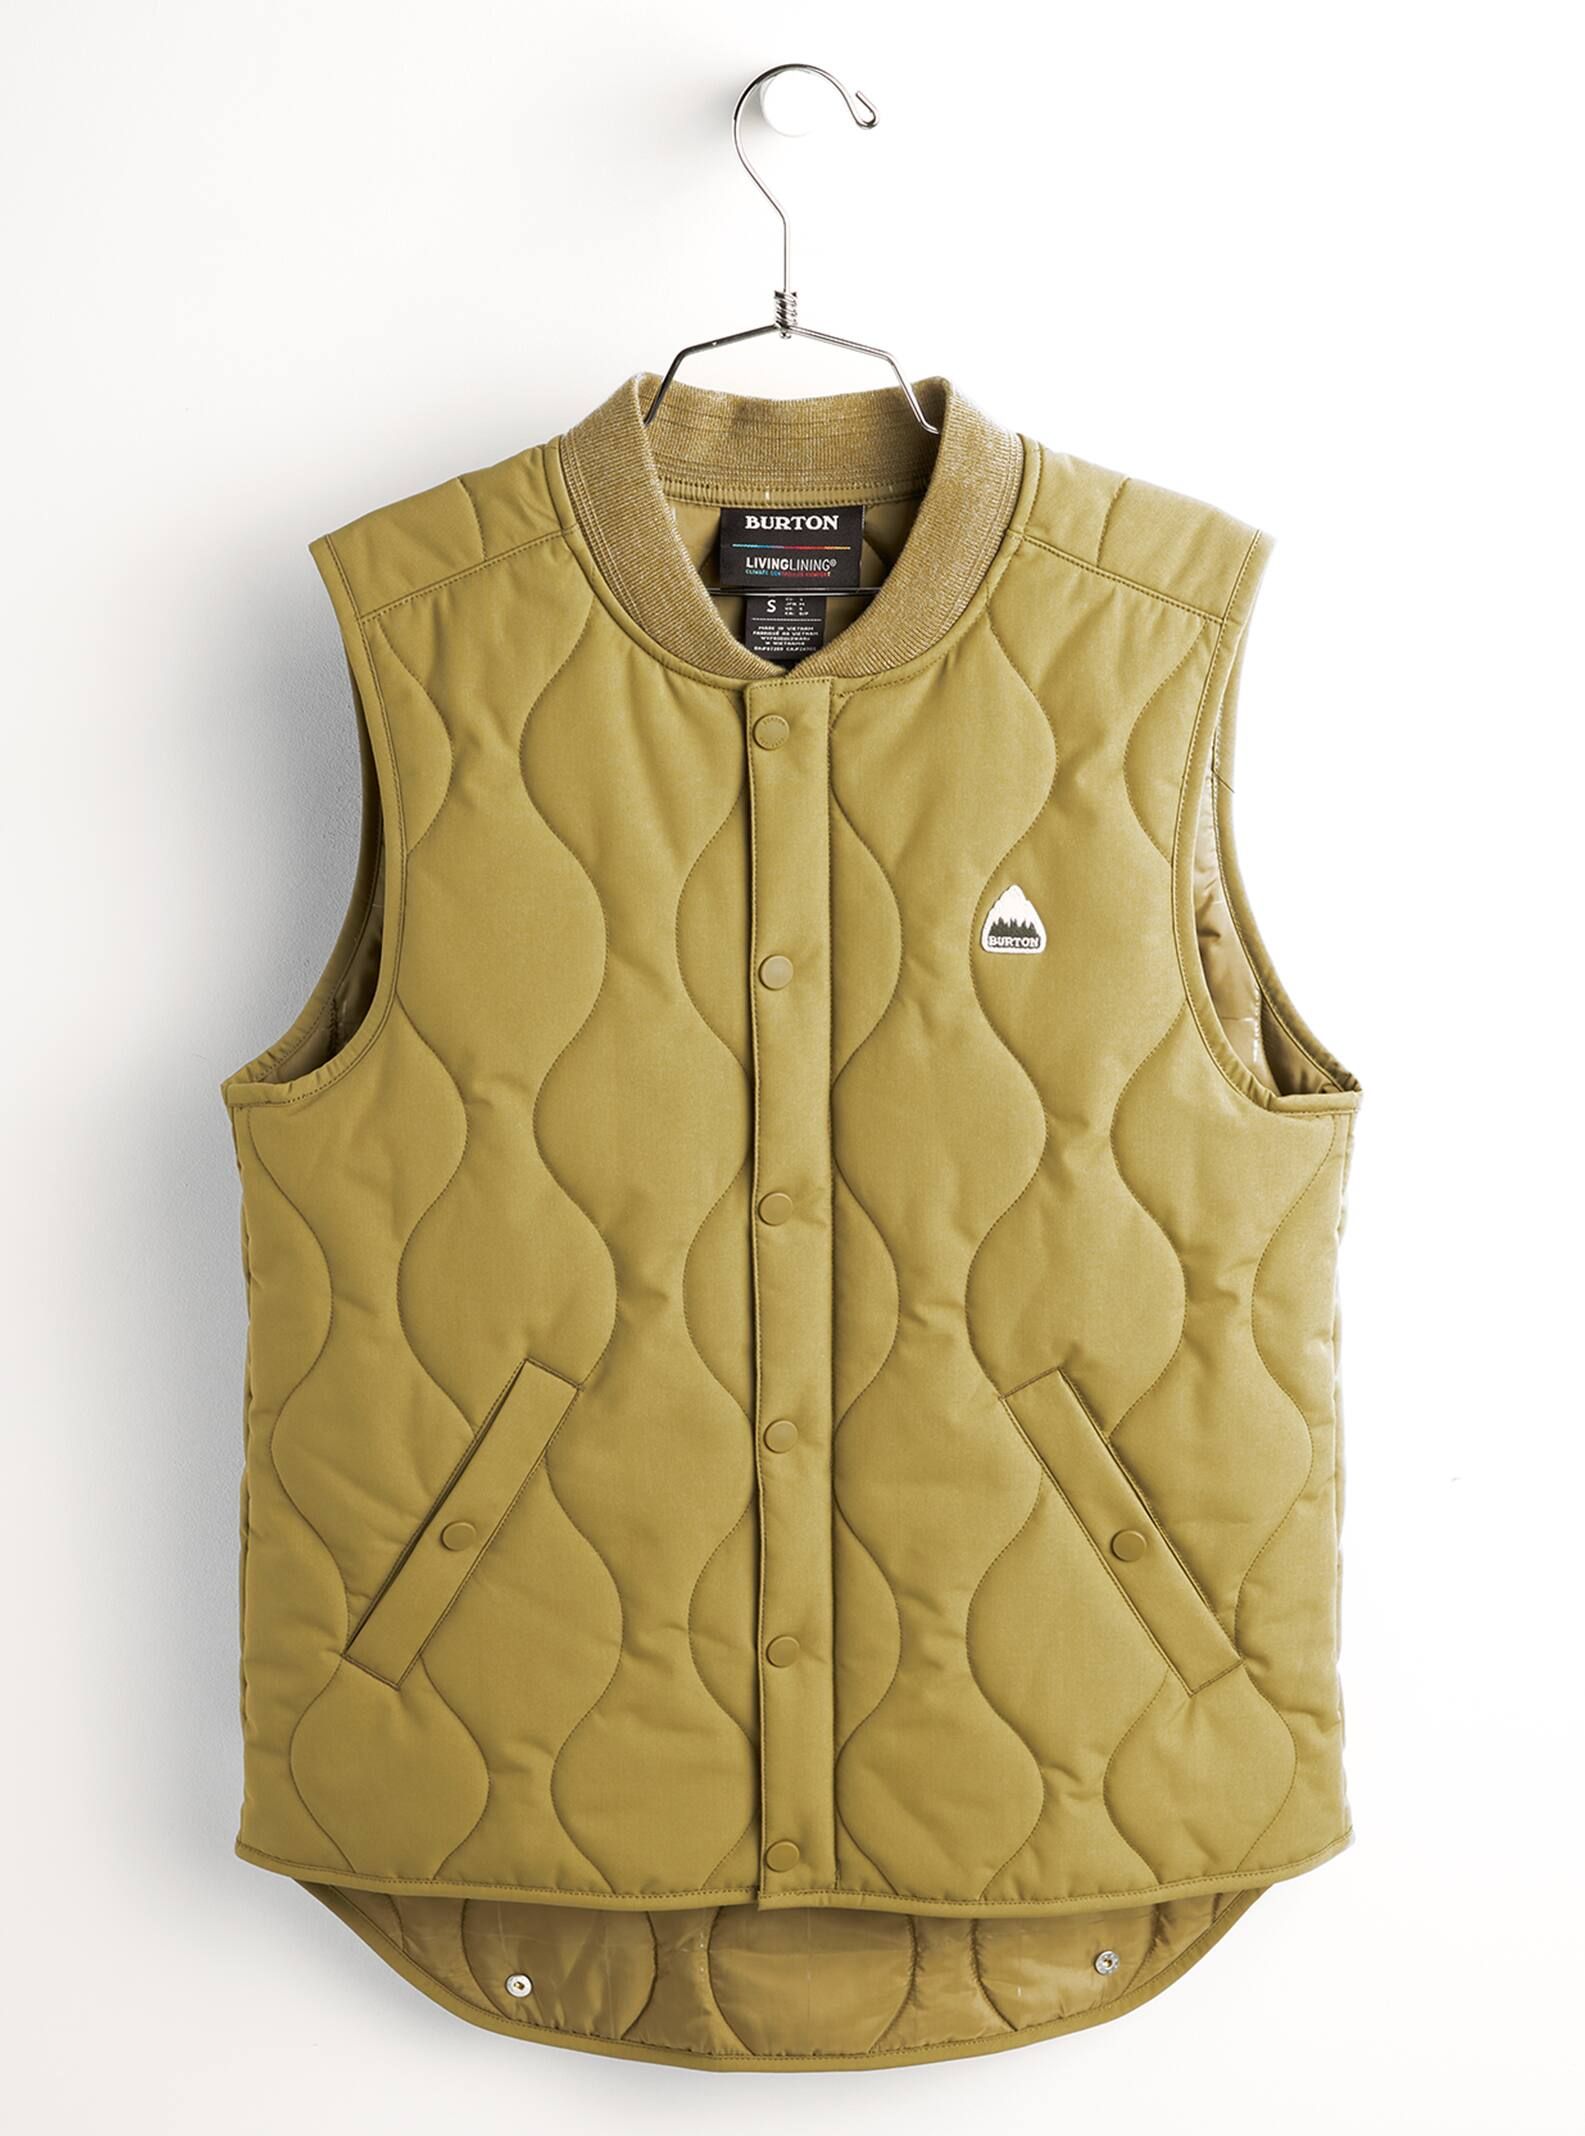 Stylish Cotton Vests for Everyday Wear